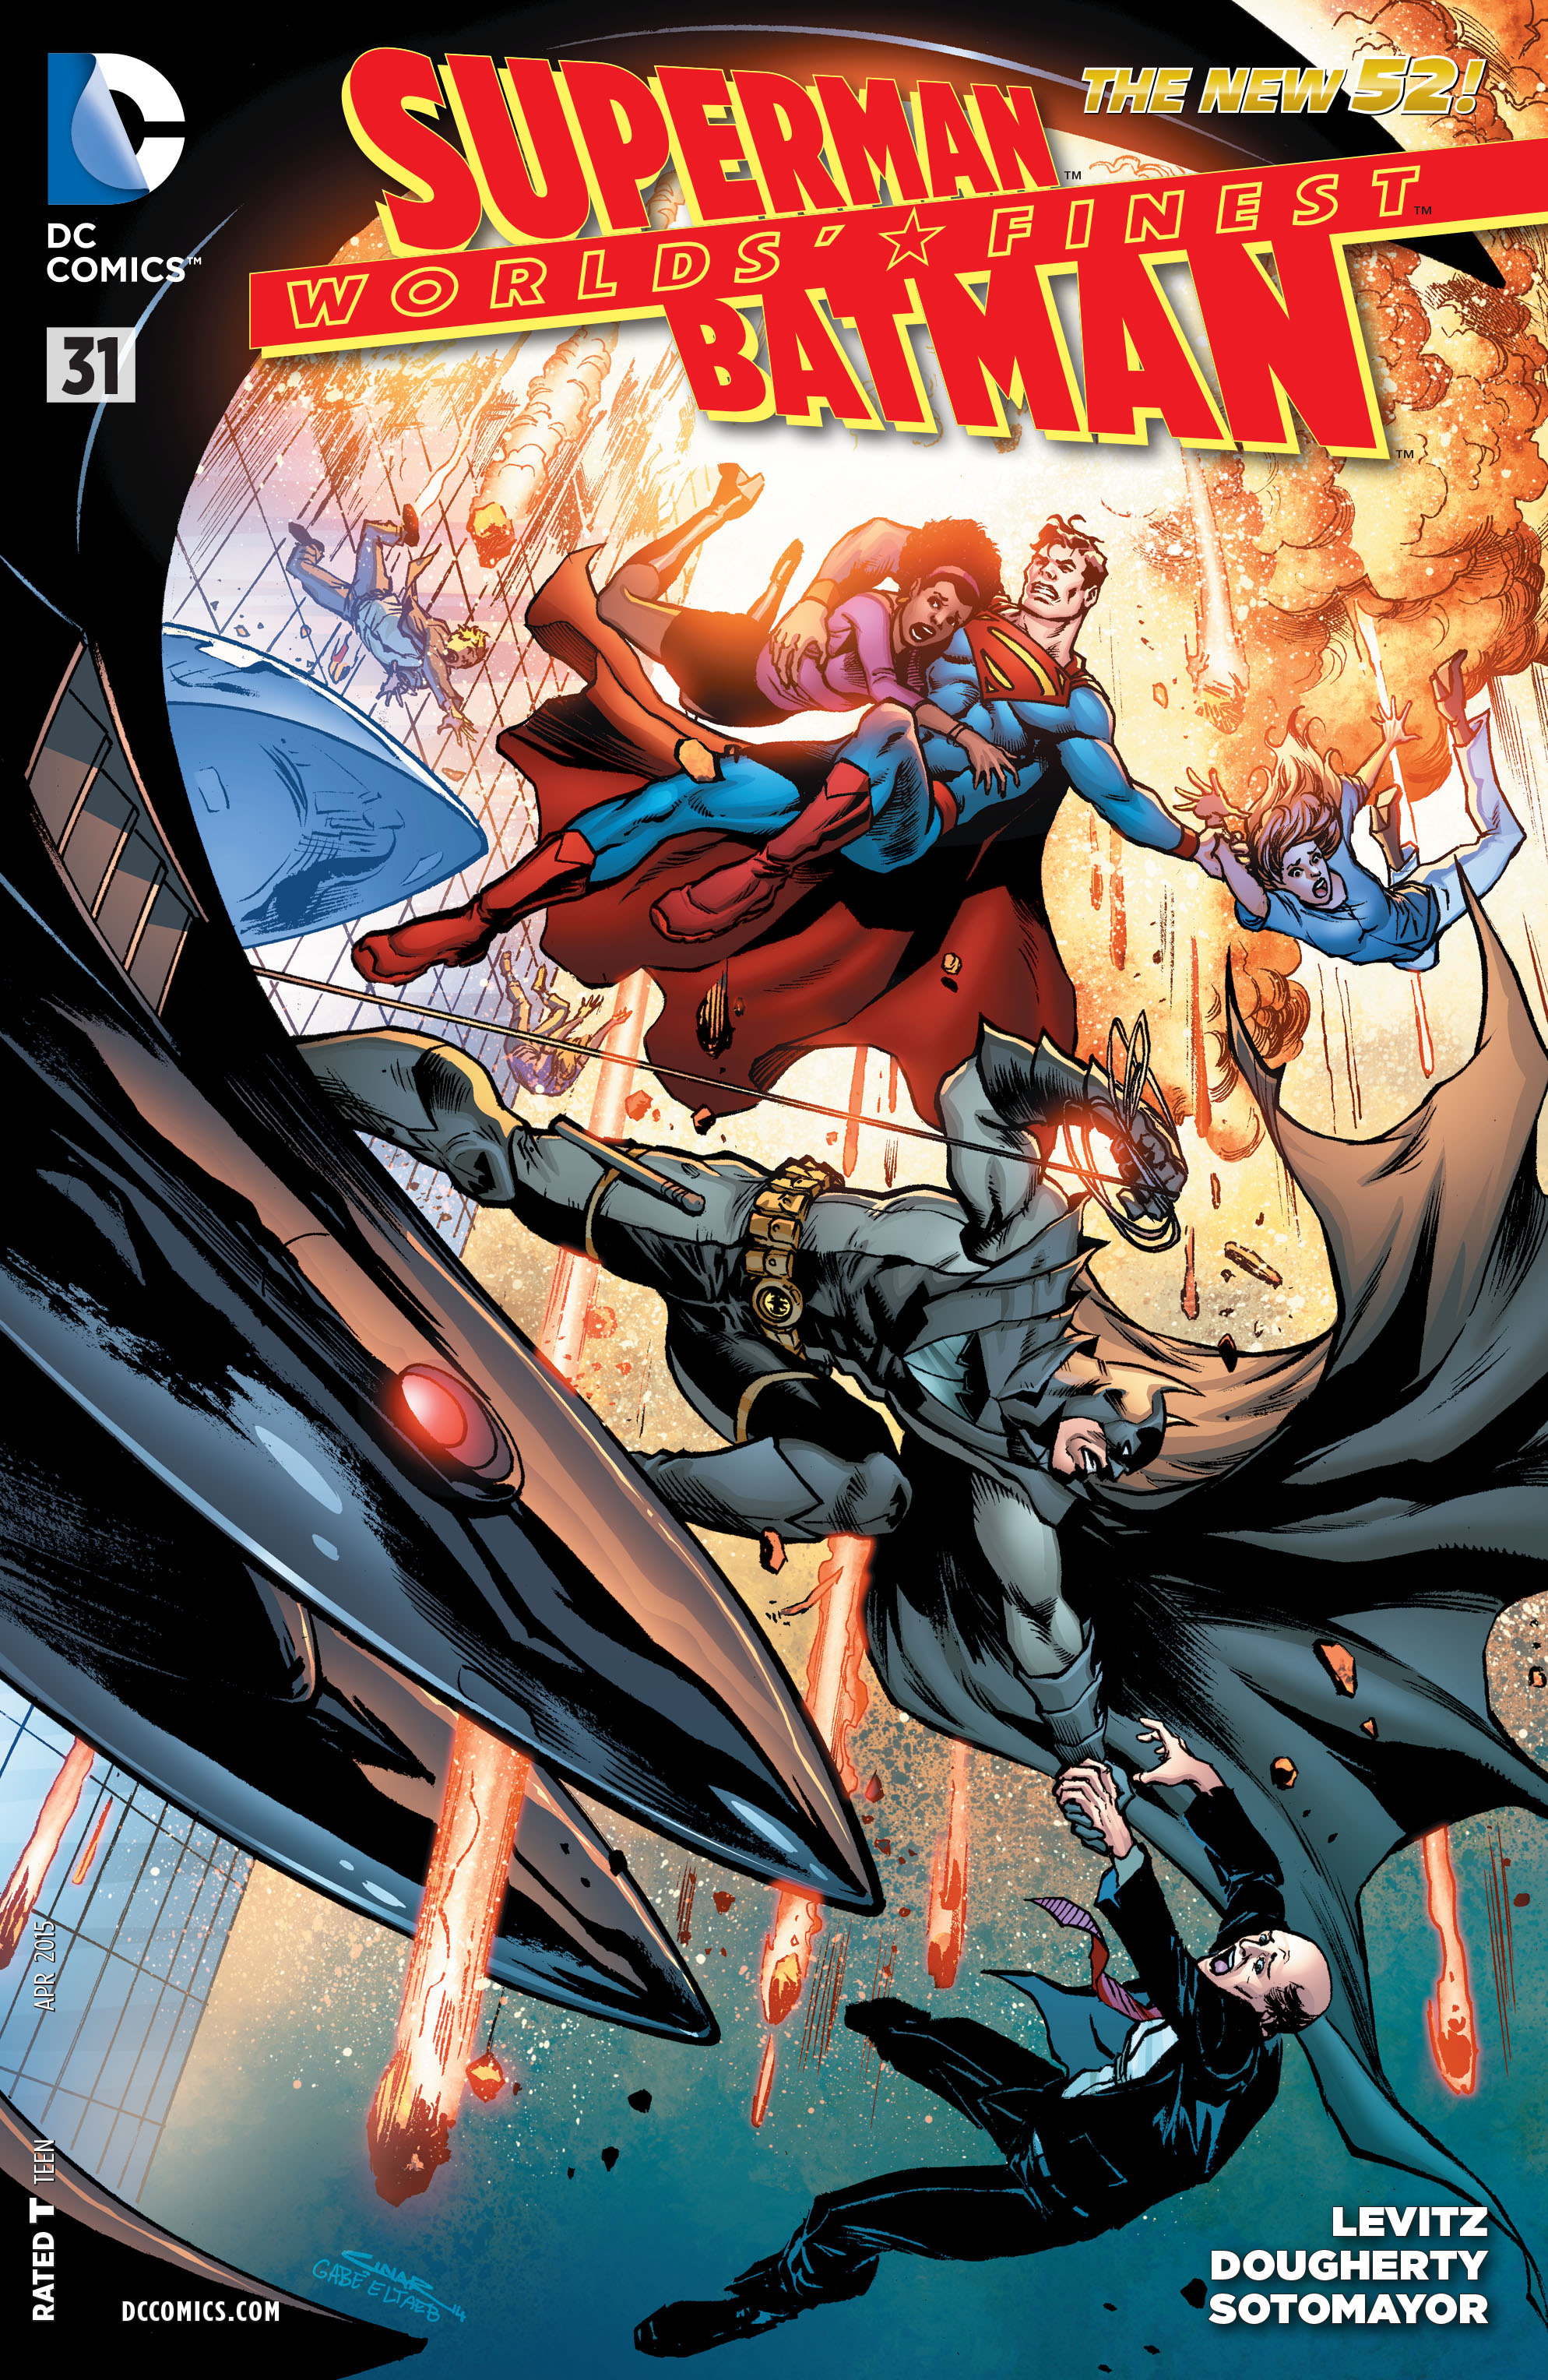 Read online Worlds' Finest comic -  Issue #31 - 1